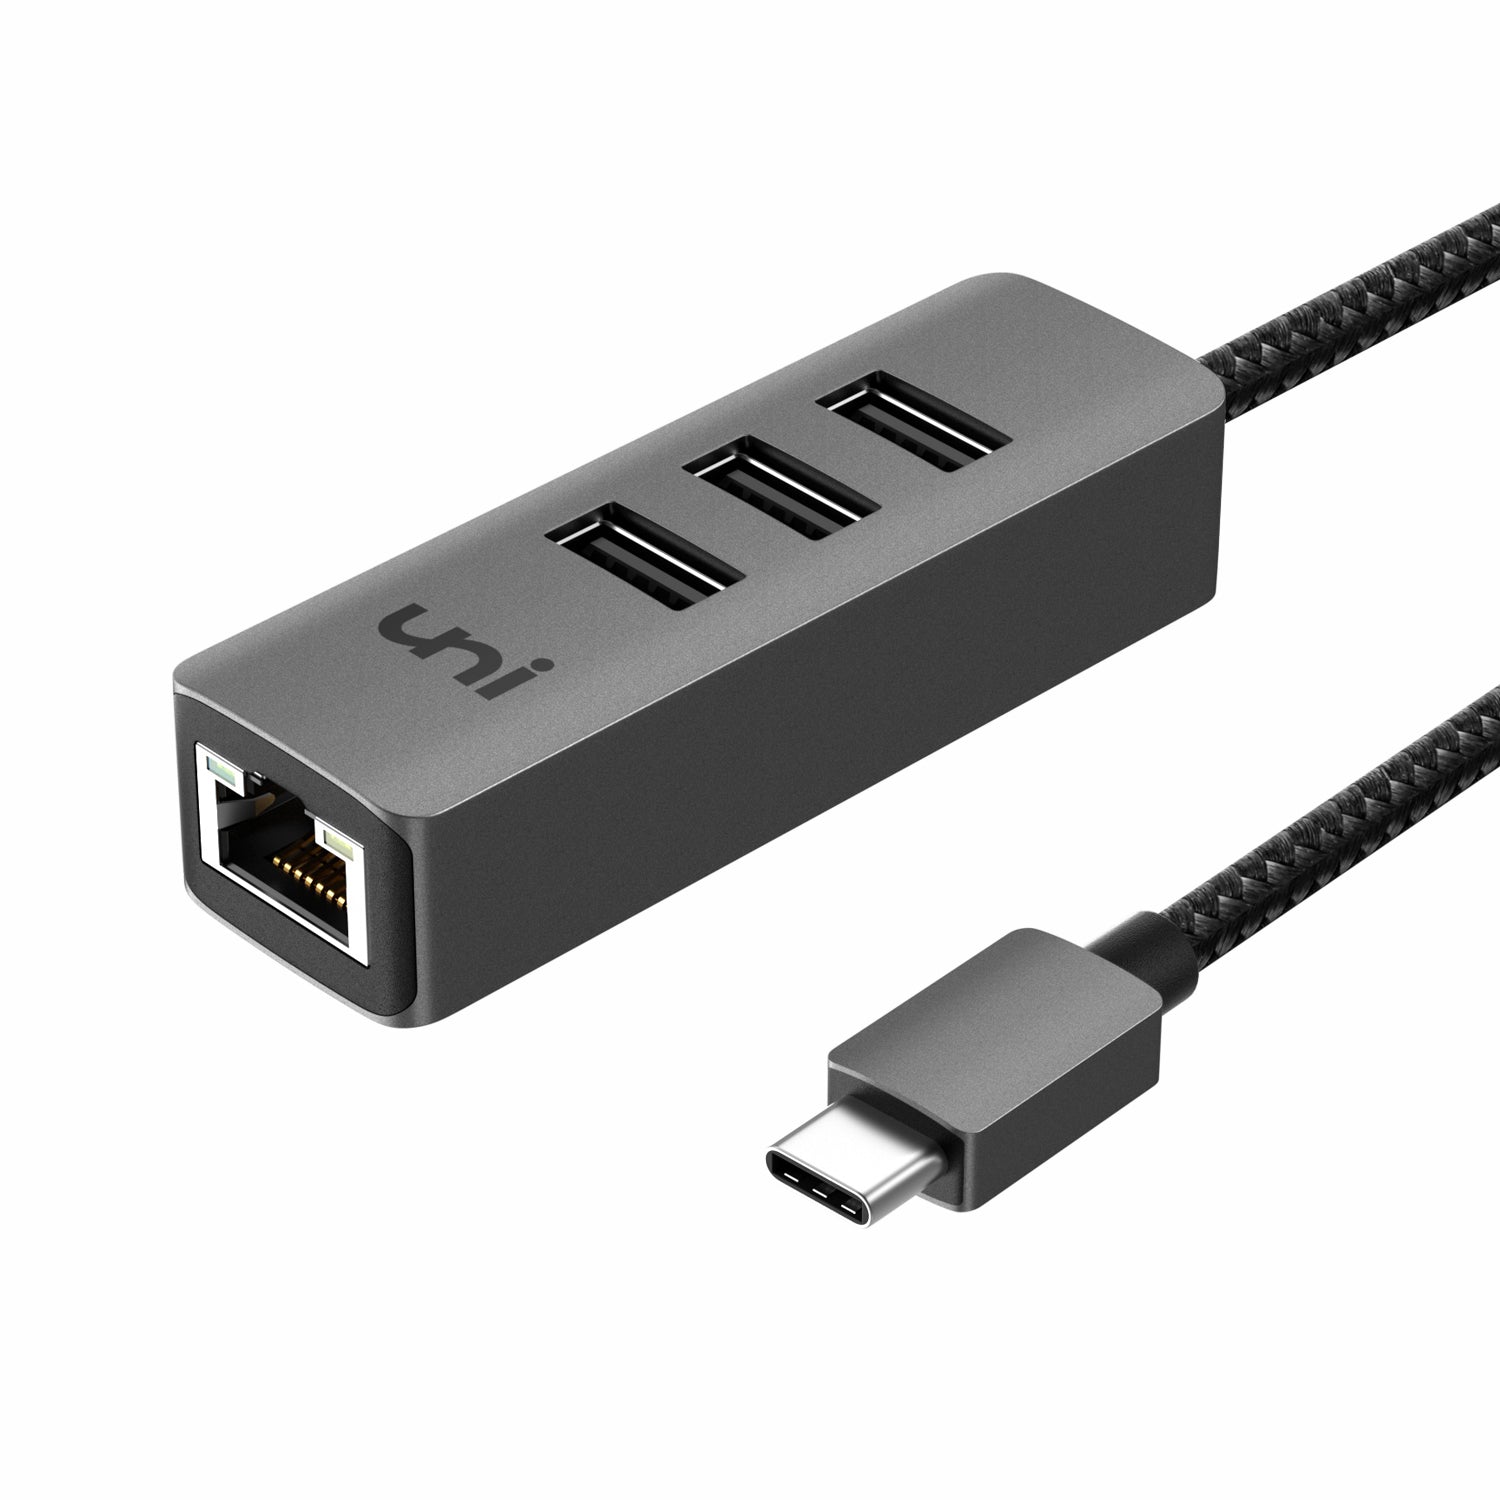 MSLFORCE  Fabricant USB 3.1 Type-C Adaptateur Multiport vers HDMI